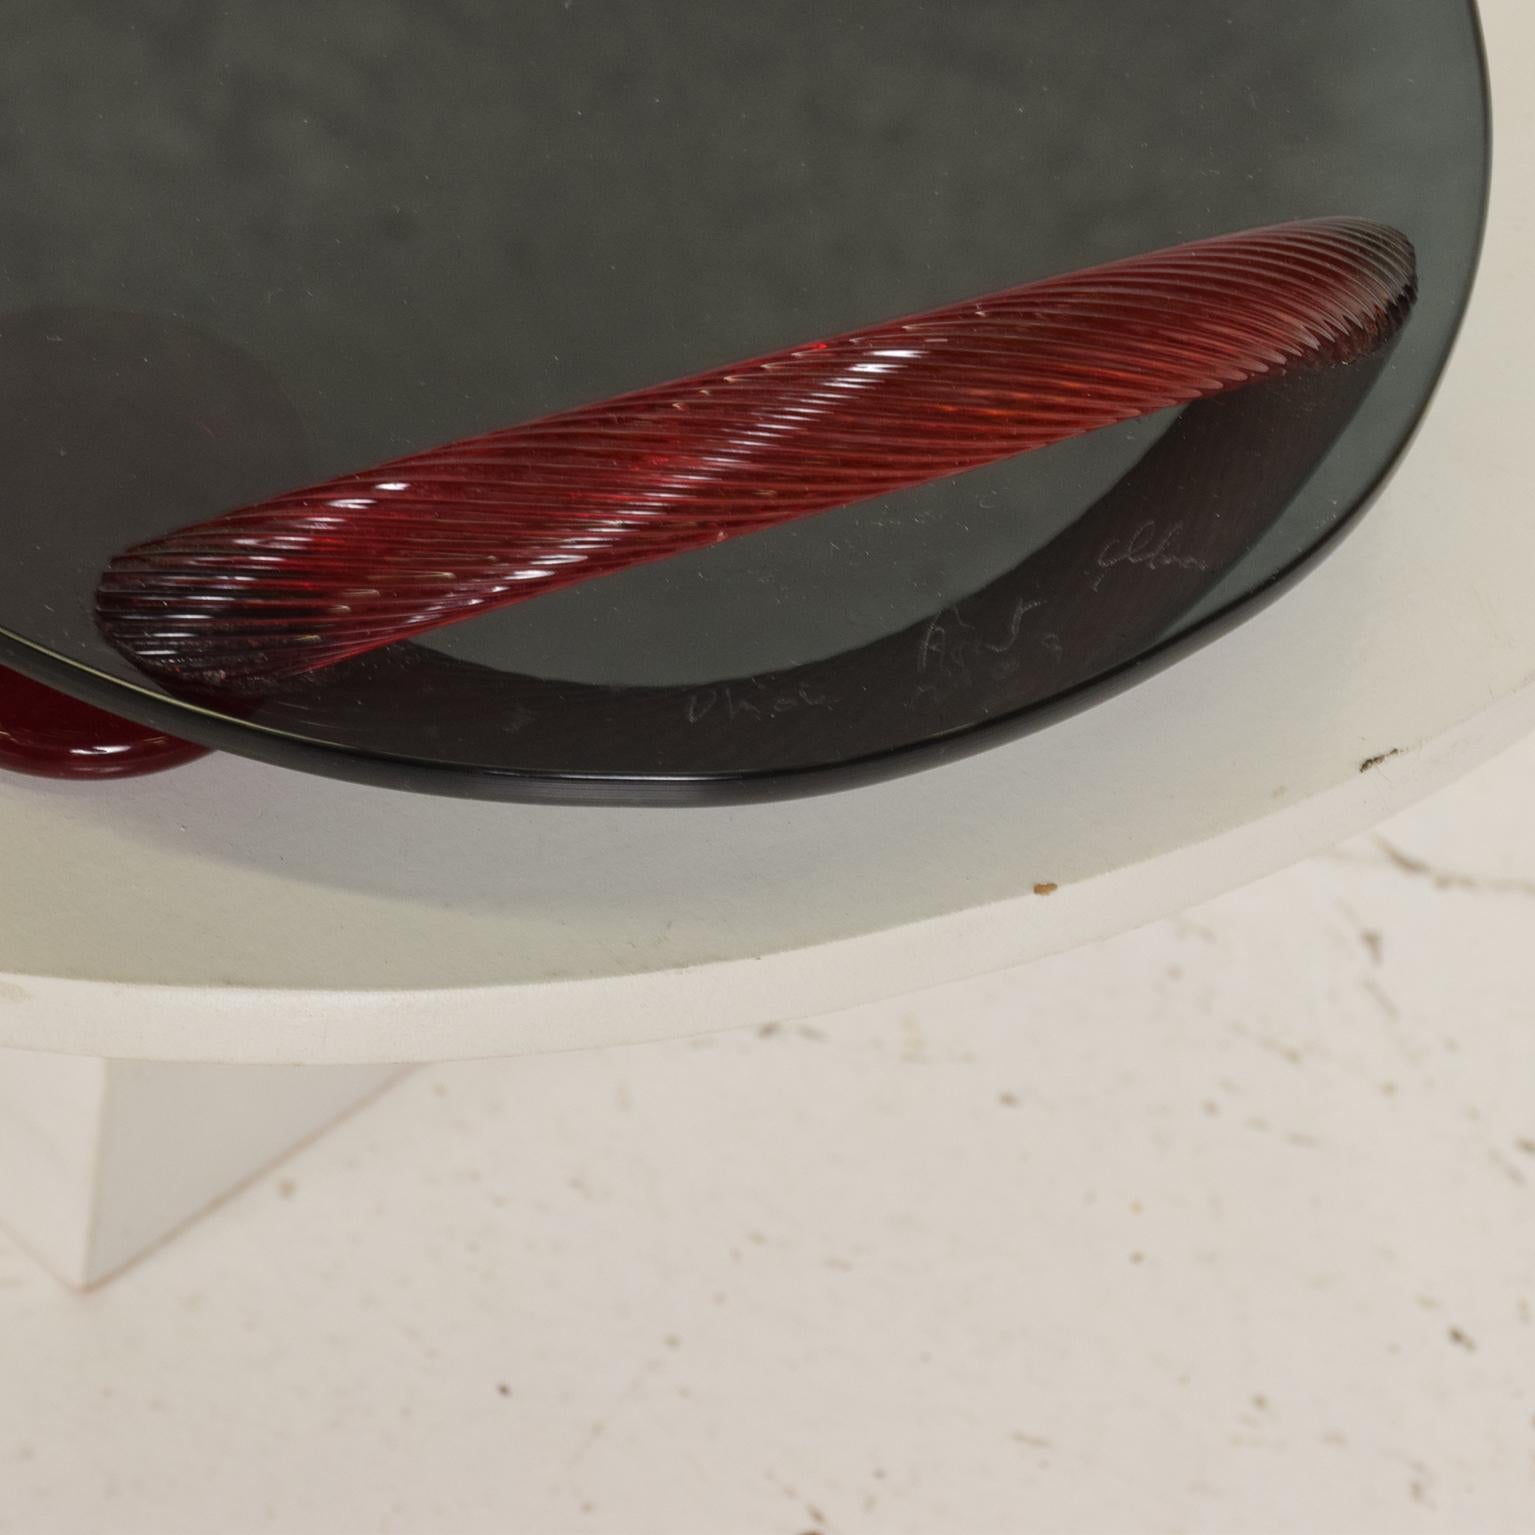 For your consideration, a modernist oval serving tray in smoke glass with red ruby glass handles and sabots. Signed on one side, unable to make up the signature from the maker.